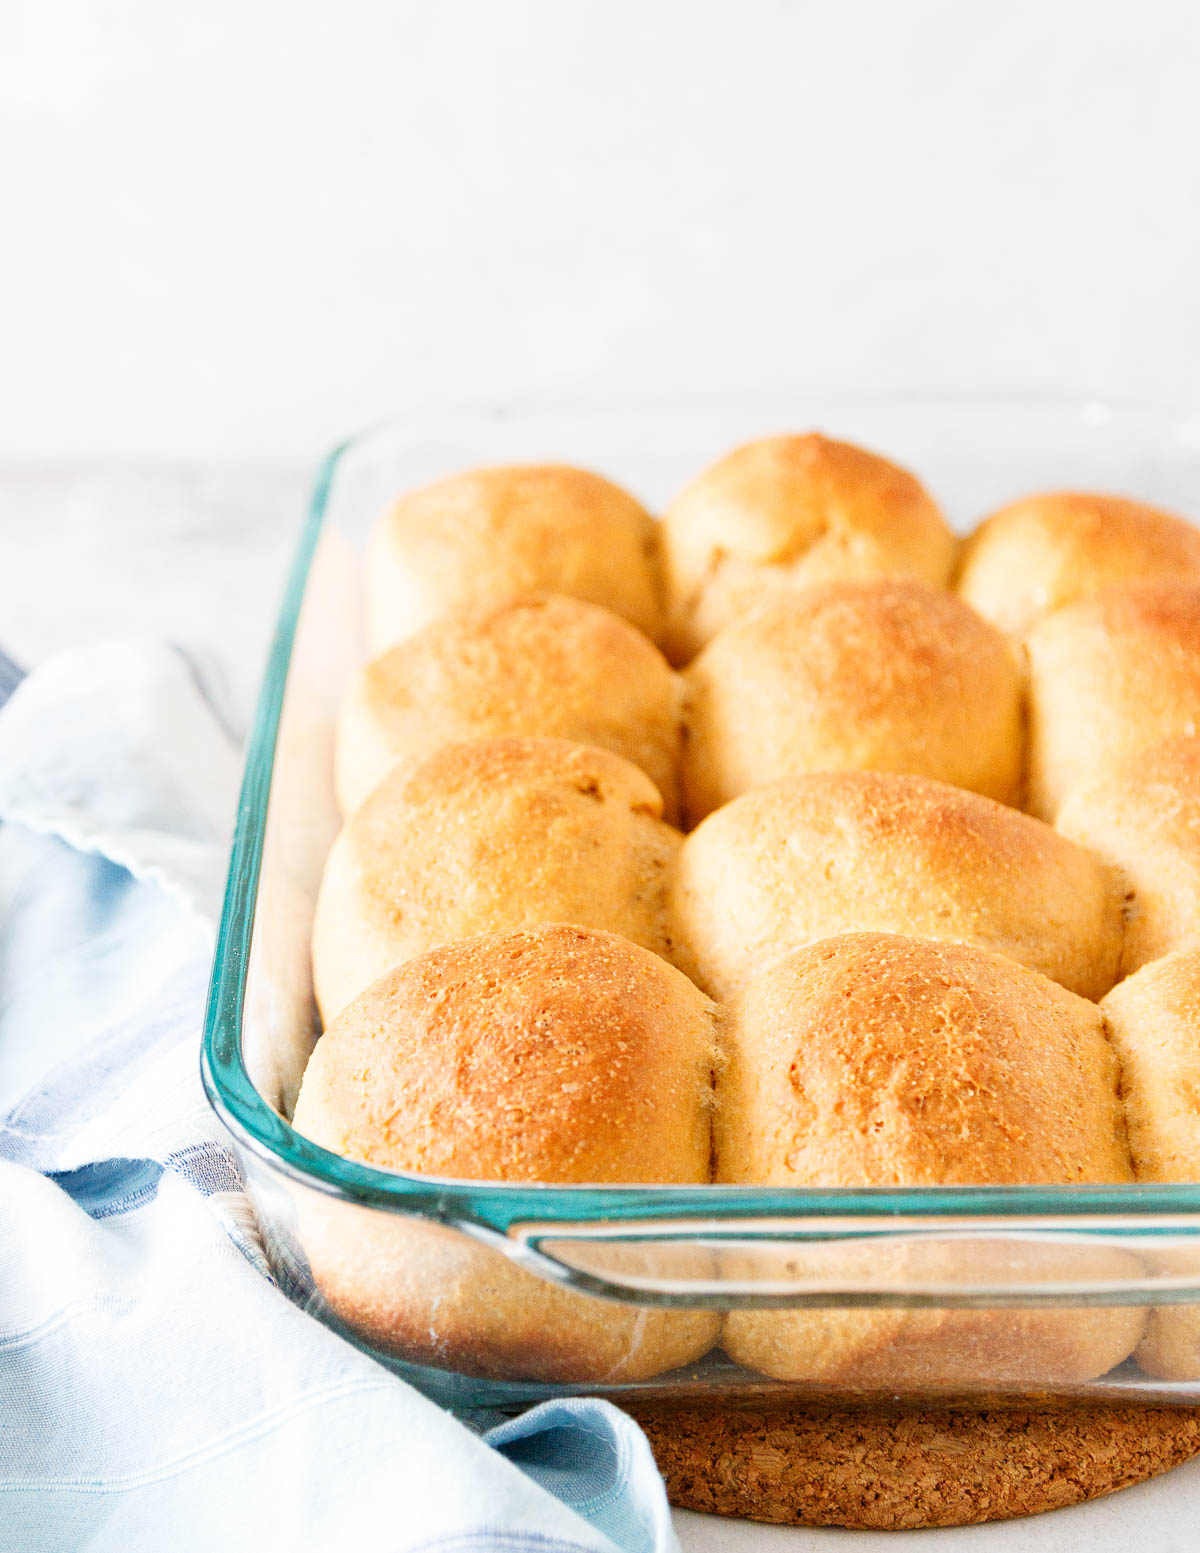 baked rolls in a glass dish